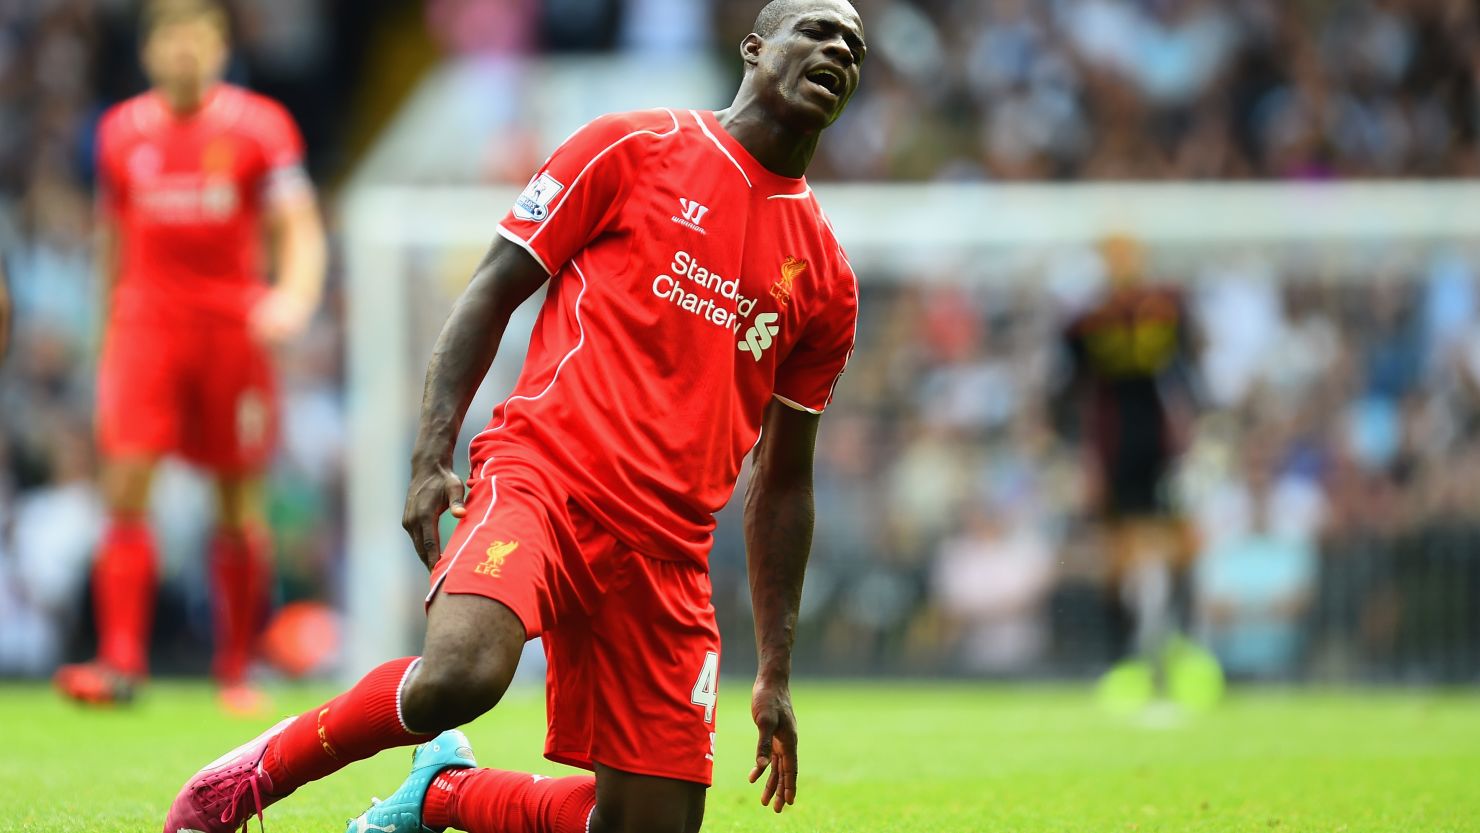 Mario Balotelli showed glimpses of quality as Liverpool beat Spurs 3-0.